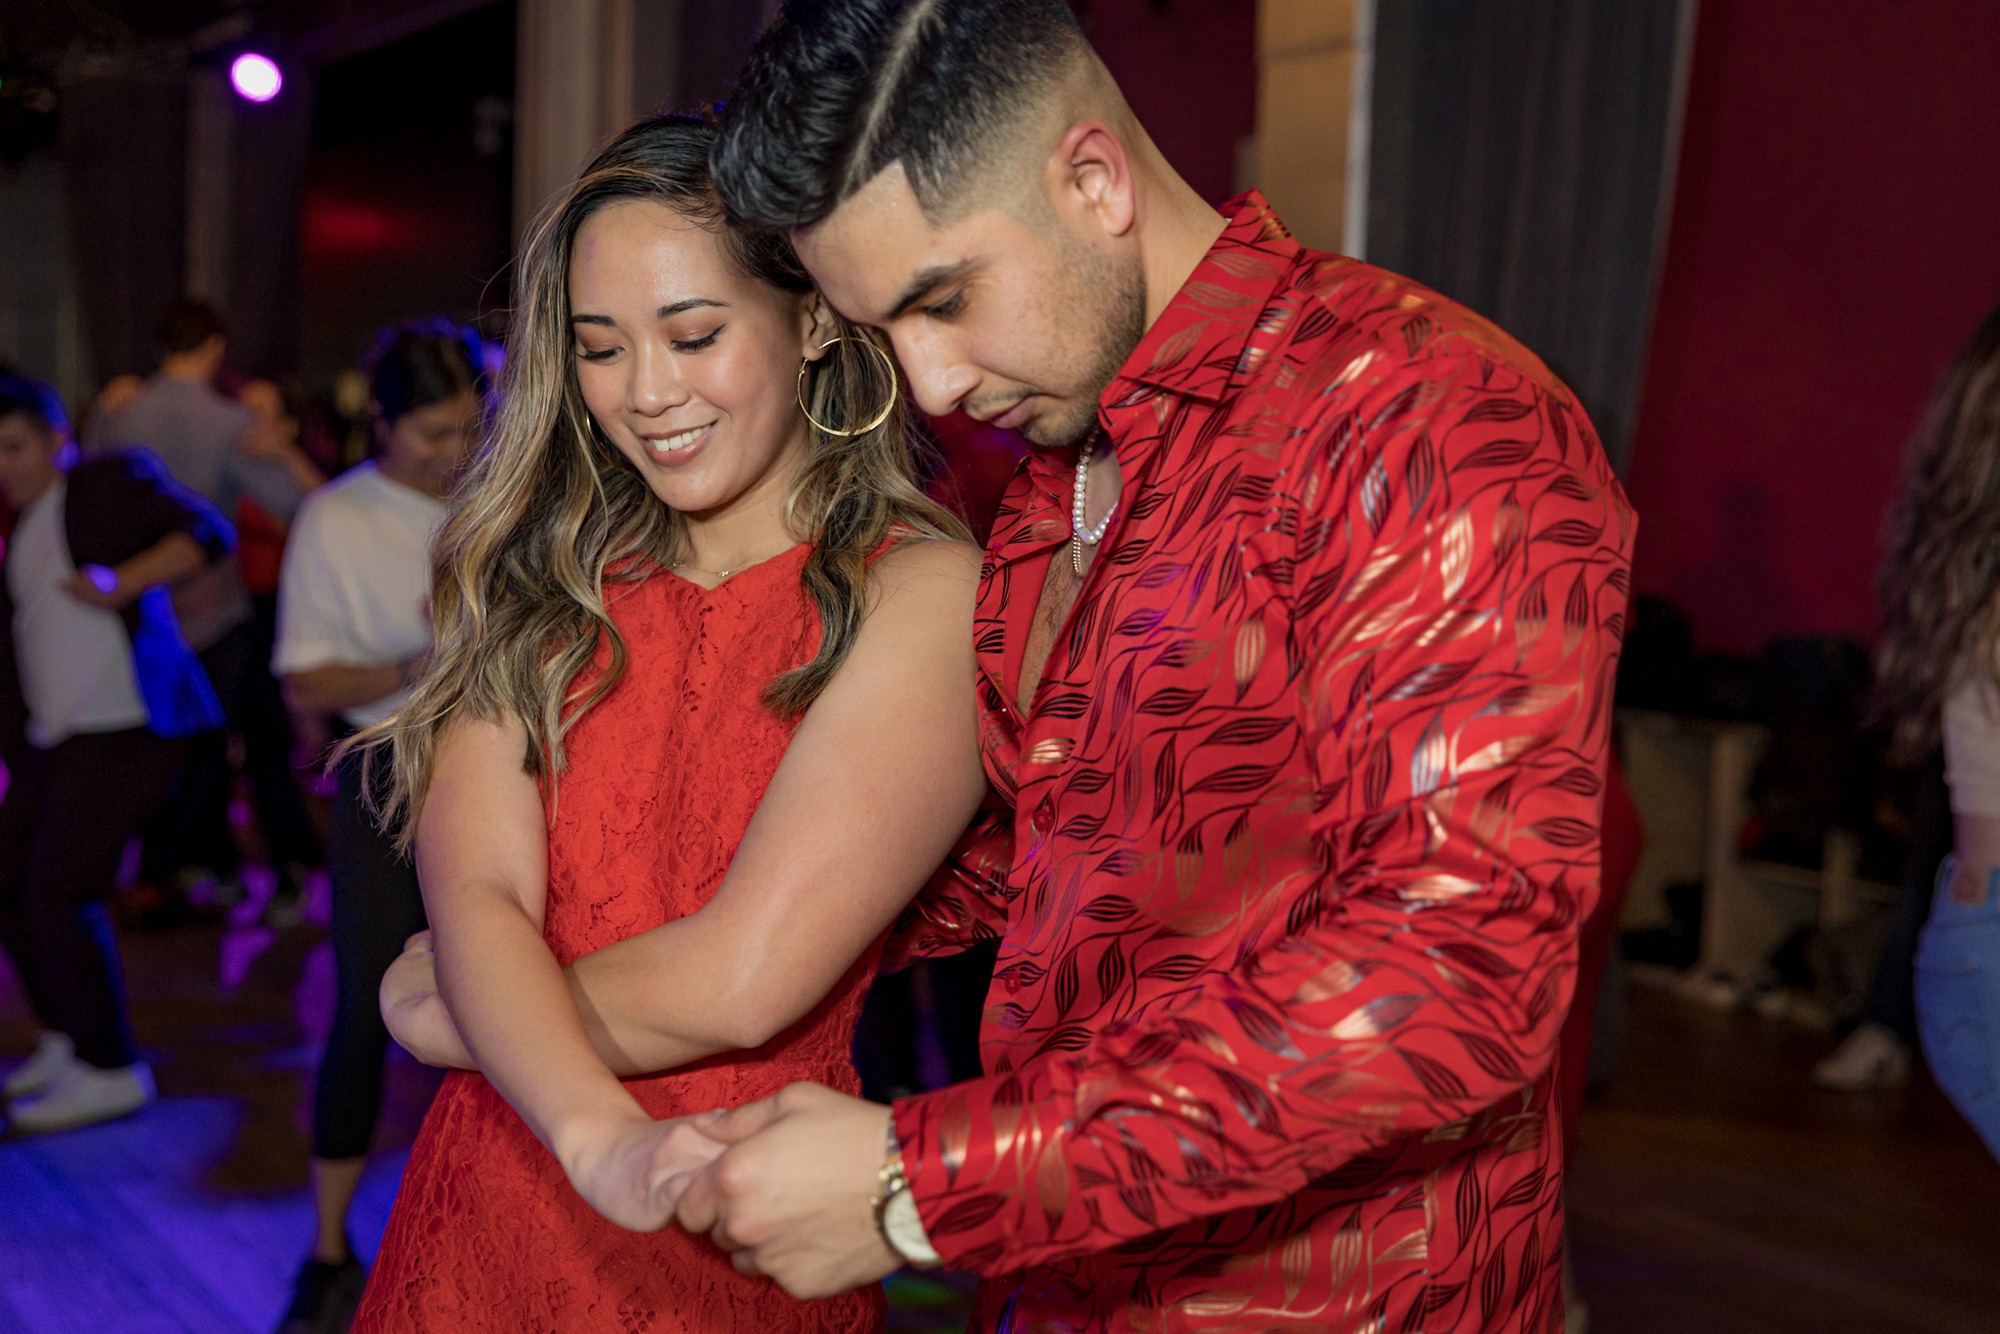 A man and woman, both dressed in red, hold hands and move into their next salsa position.